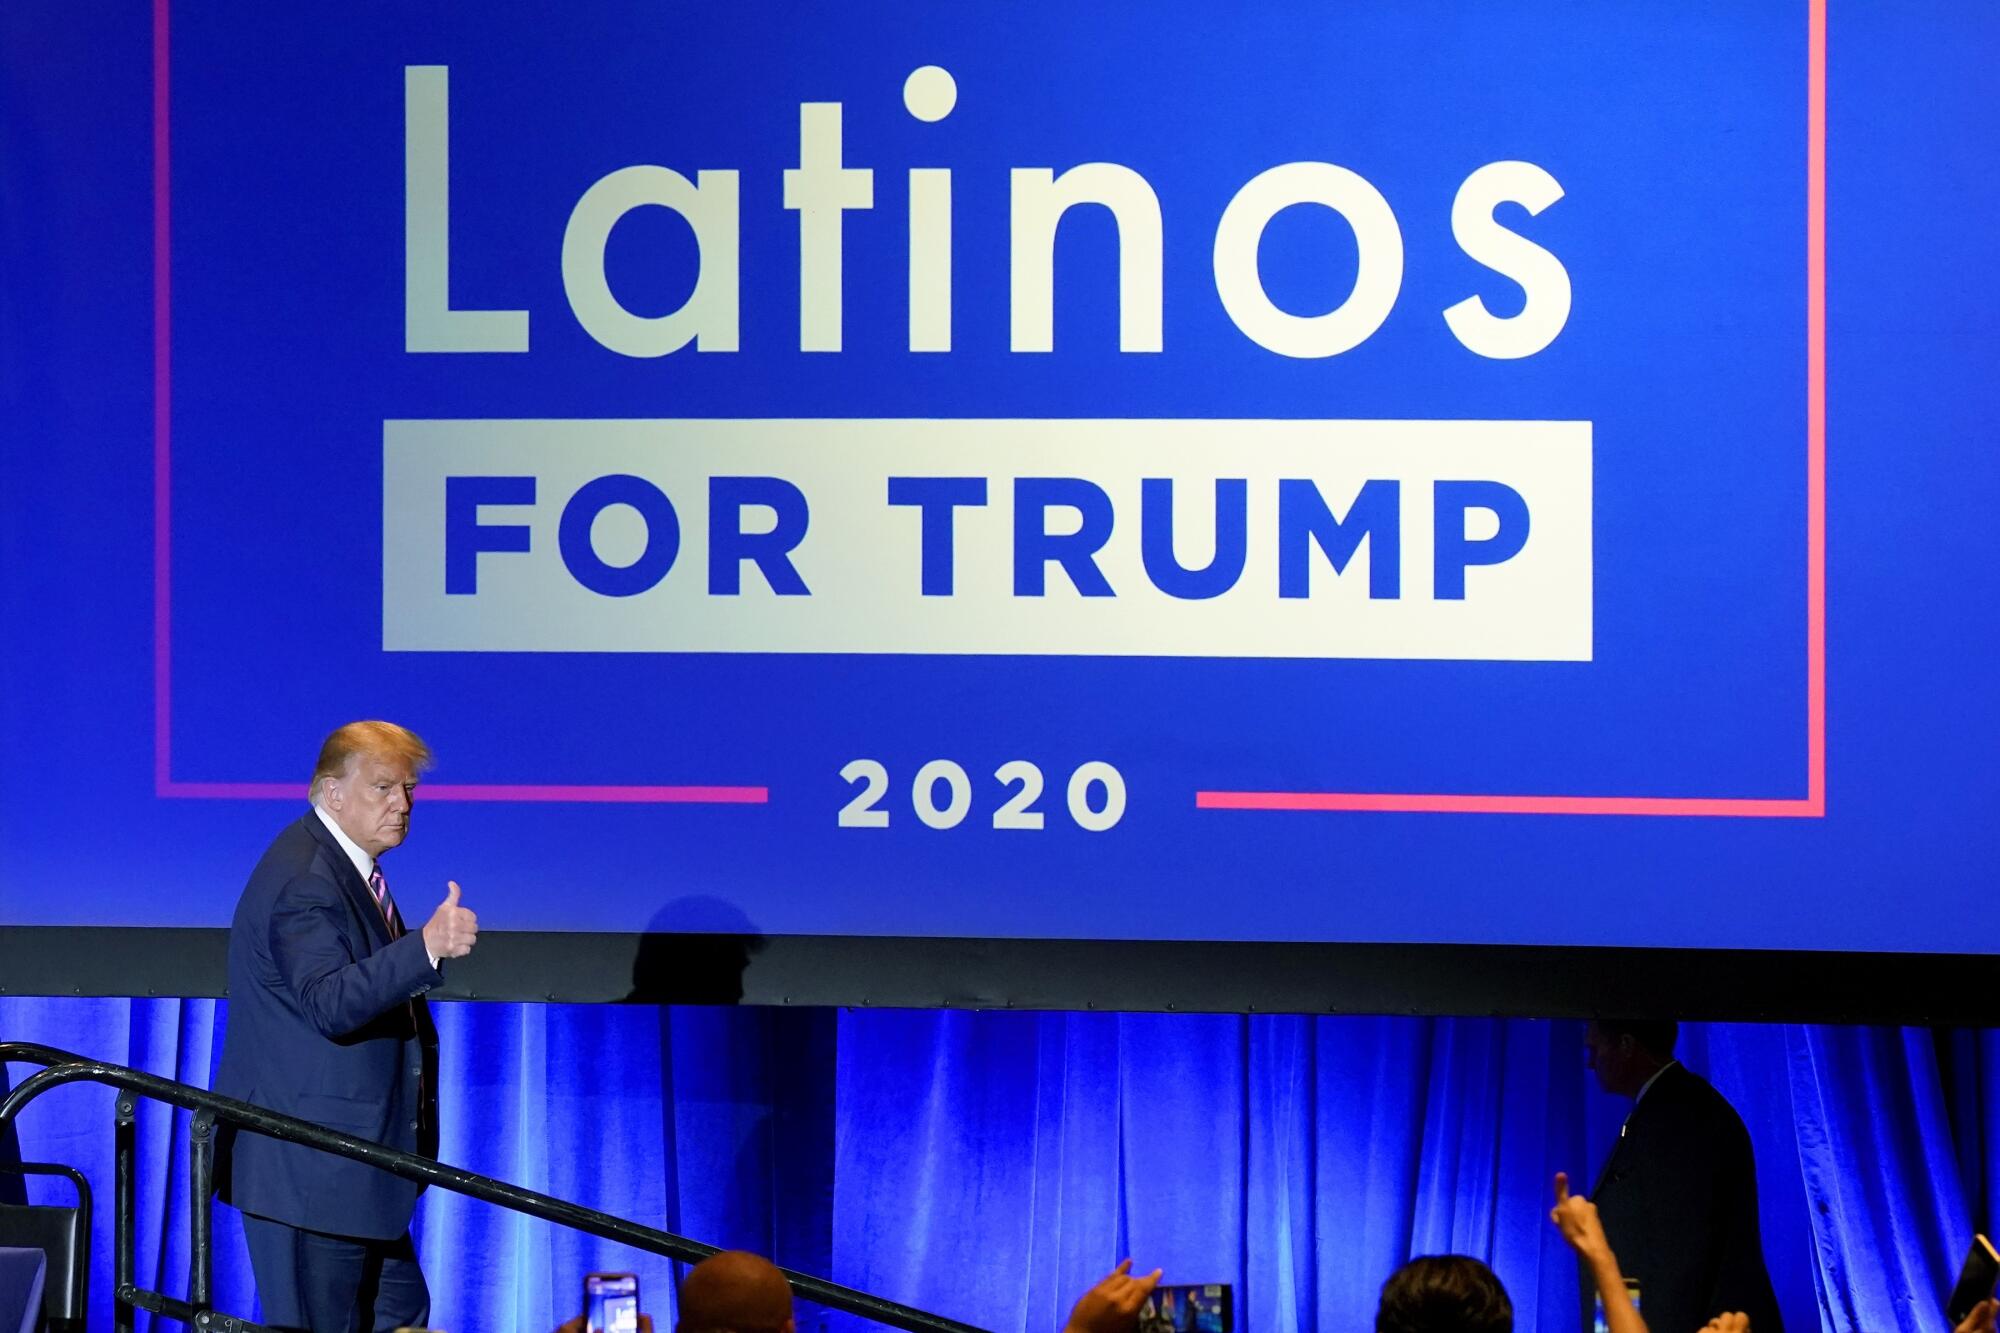 President Trump pictured from a distance below a large blue "Latinos for Trump 2020" sign, giving a thumbs-up toward a crowd